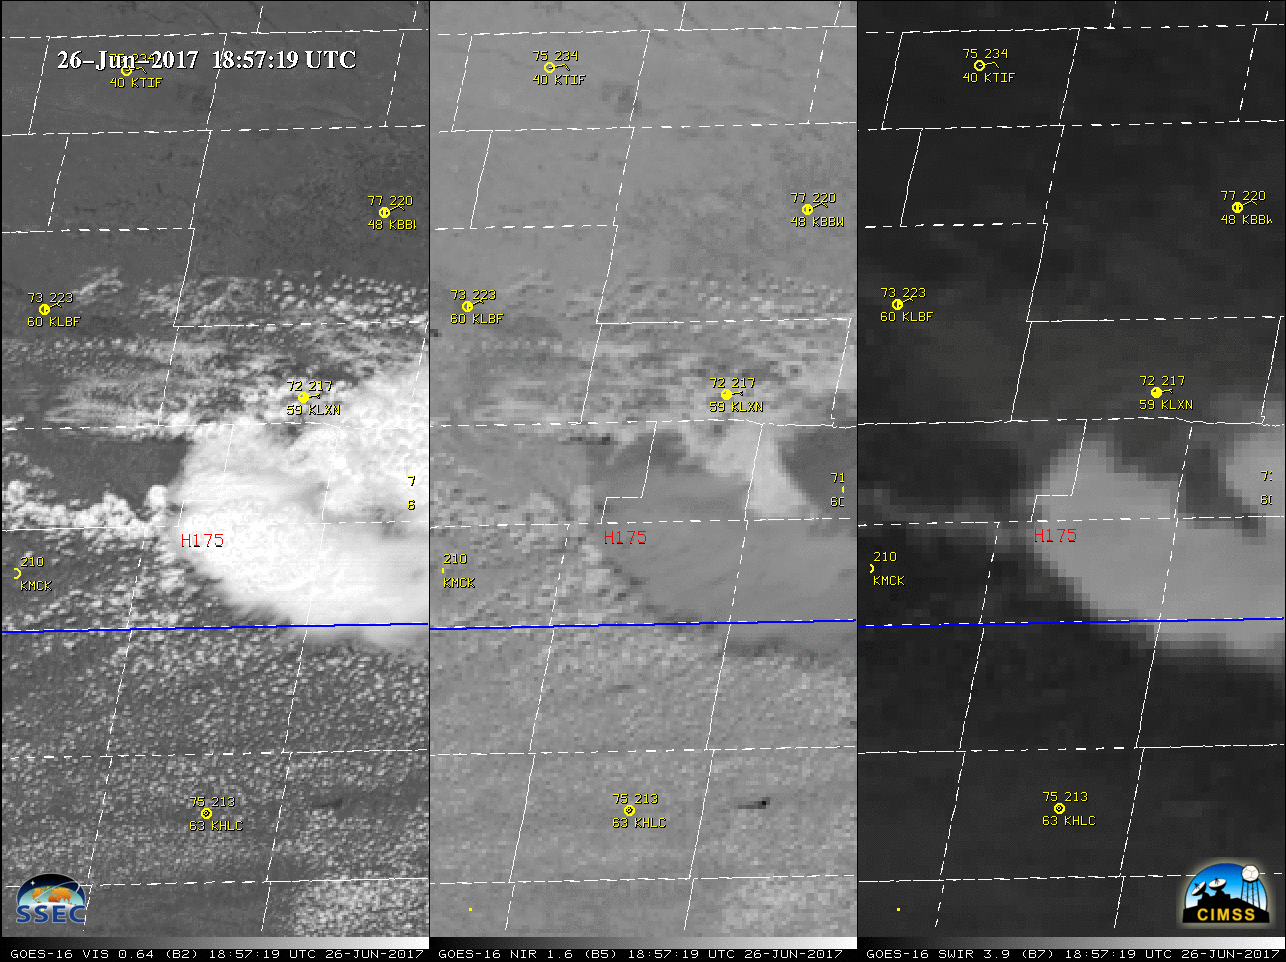 GOES-16 Visible (0.64 µm, left), Snow/Ice (1.61 µm, center) and Shortwave Infrared (3.9 µm, right) images, with hourly surface reports plotted in yellow and SPC storm reports of hail size plotted in red [click to play MP4 animation]